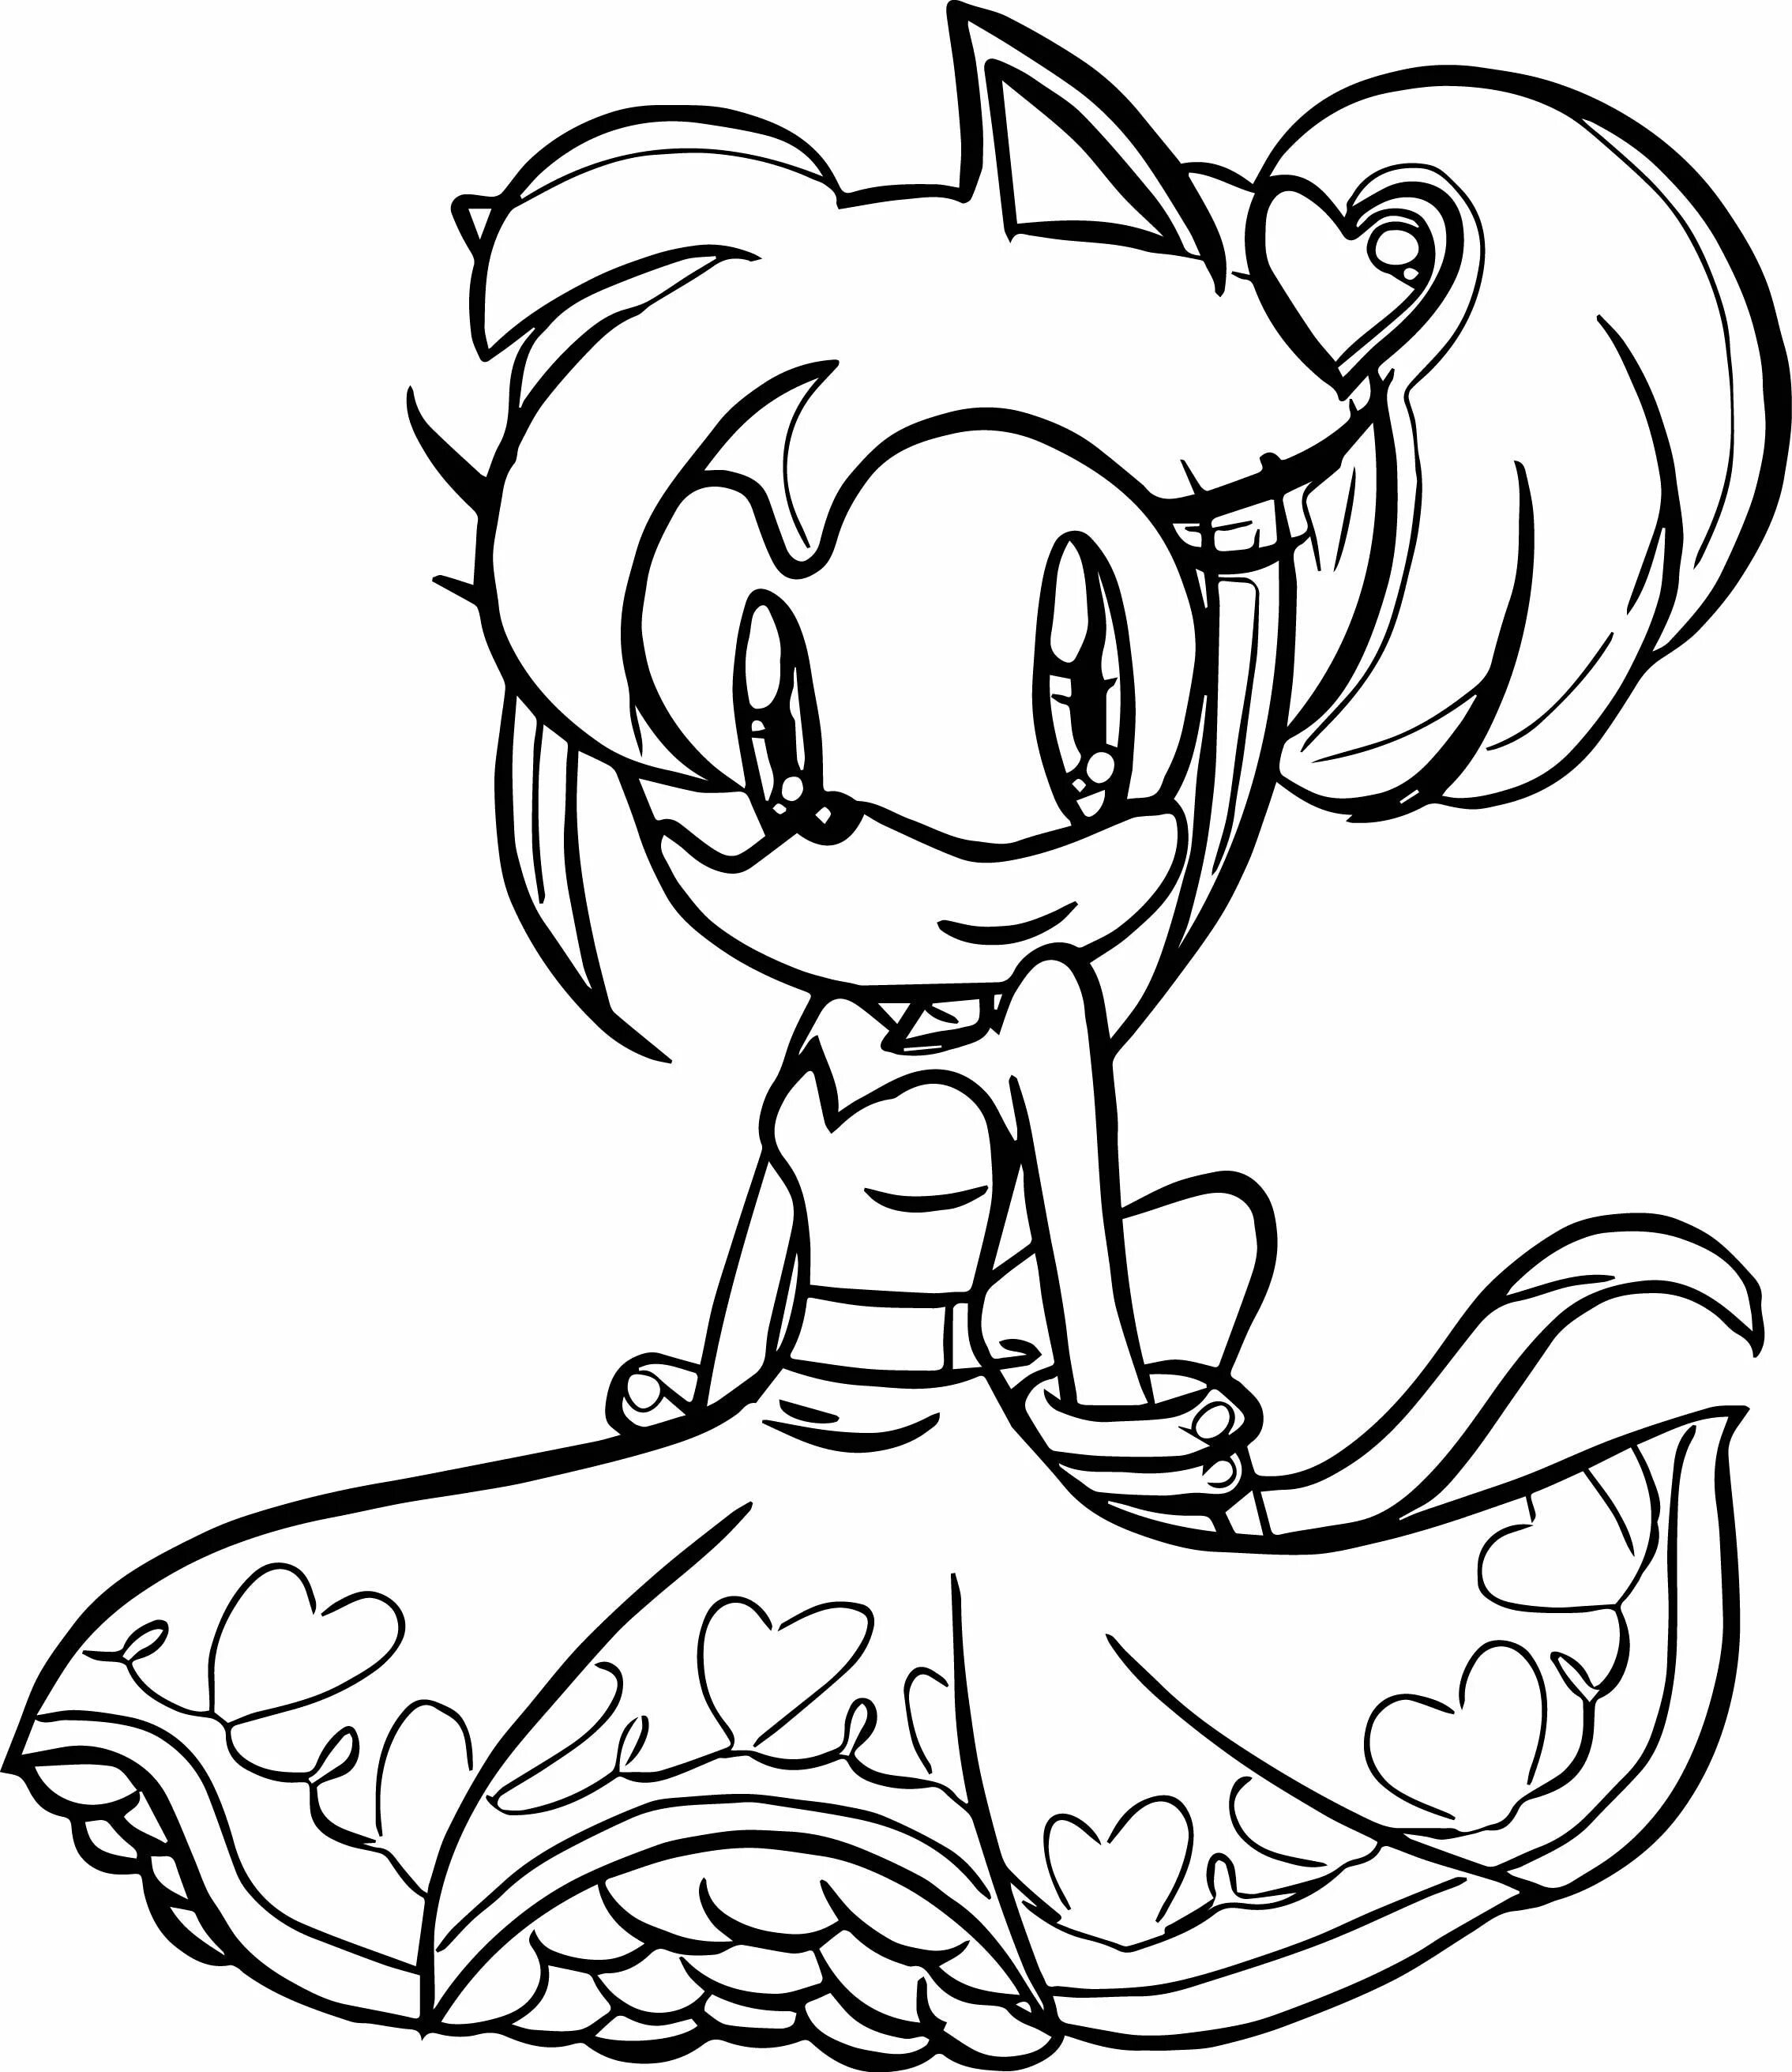 Emmy from sonic #2